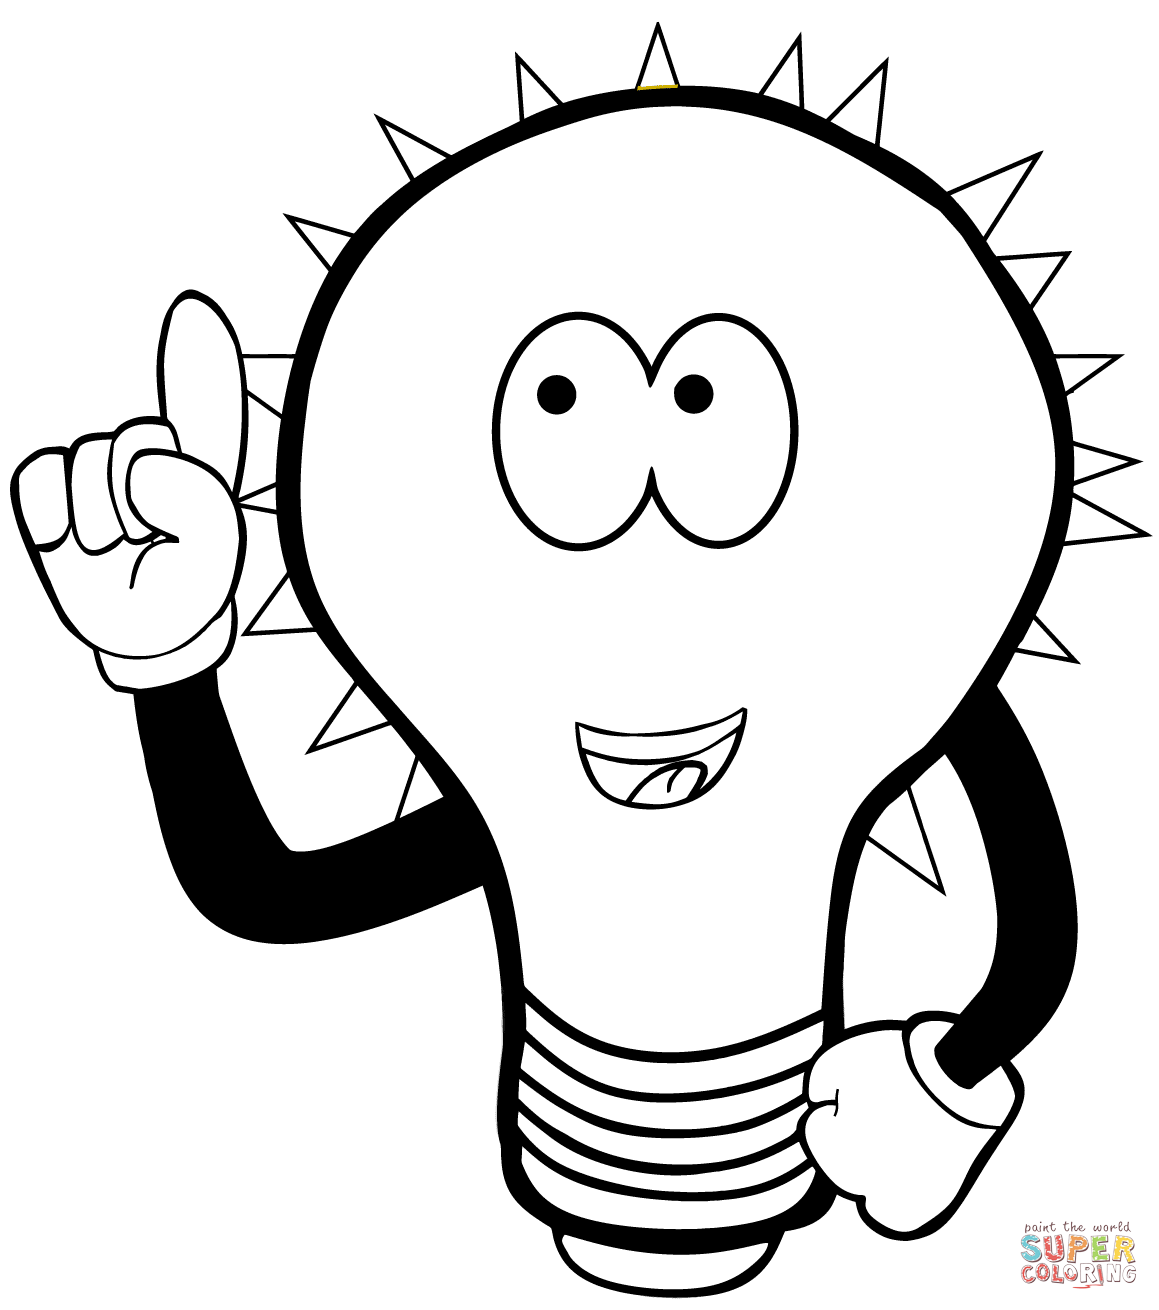 Bulb coloring page free printable coloring pages